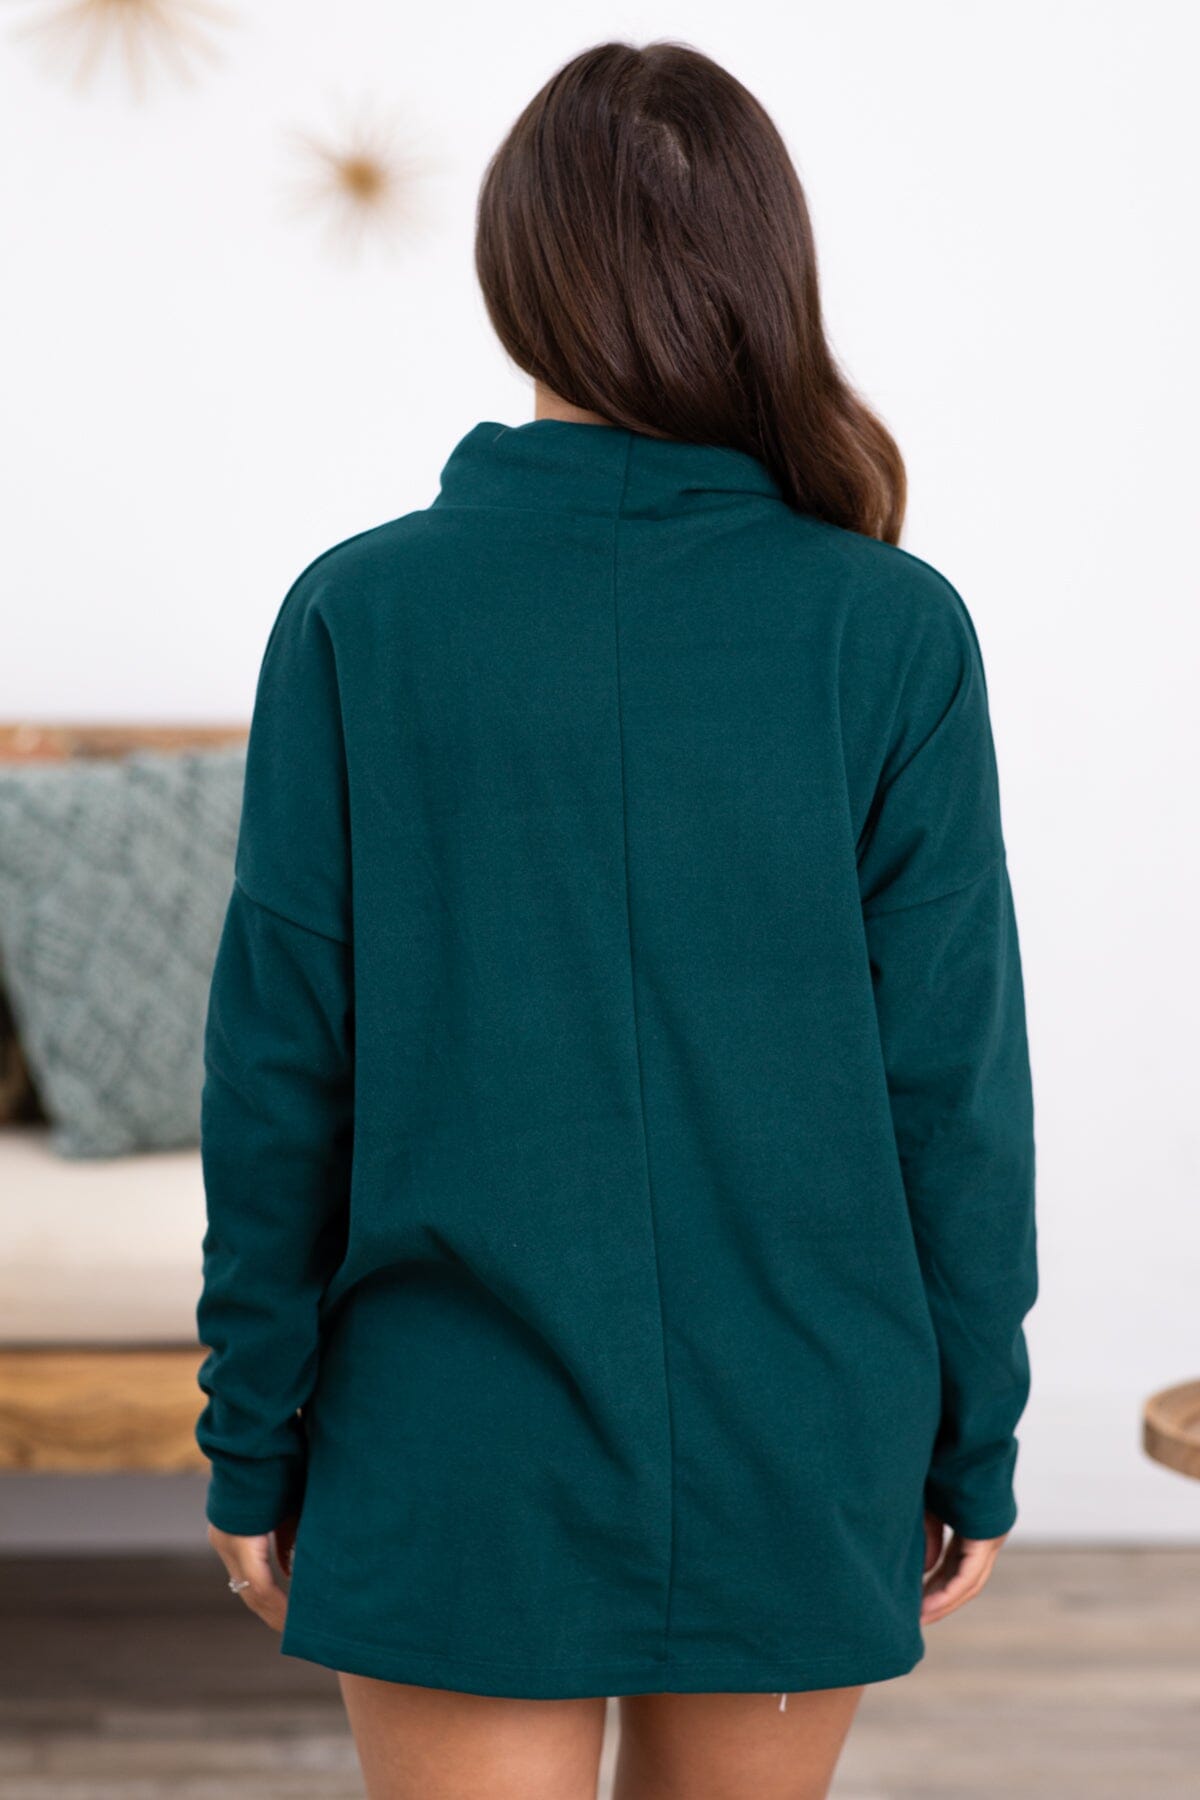 Emerald Green Cowl Neck Long Sleeve Top - Filly Flair